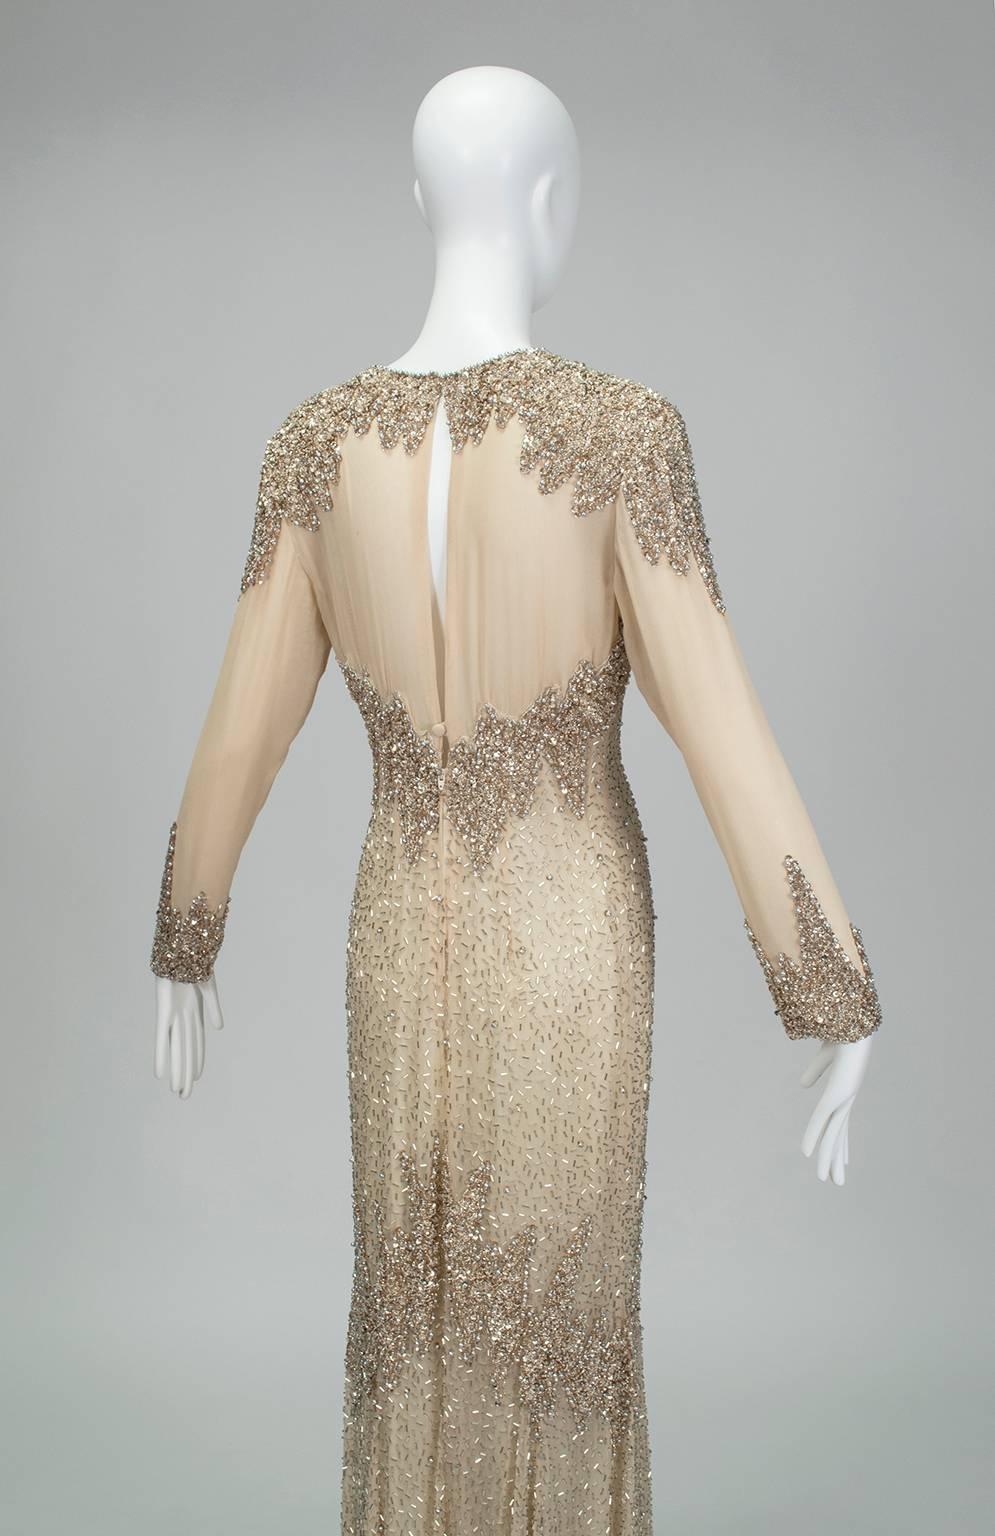 Oleg Cassini Nude Rose Gold Bead and Sequin Evening Gown - US 6, 1990s For Sale 2